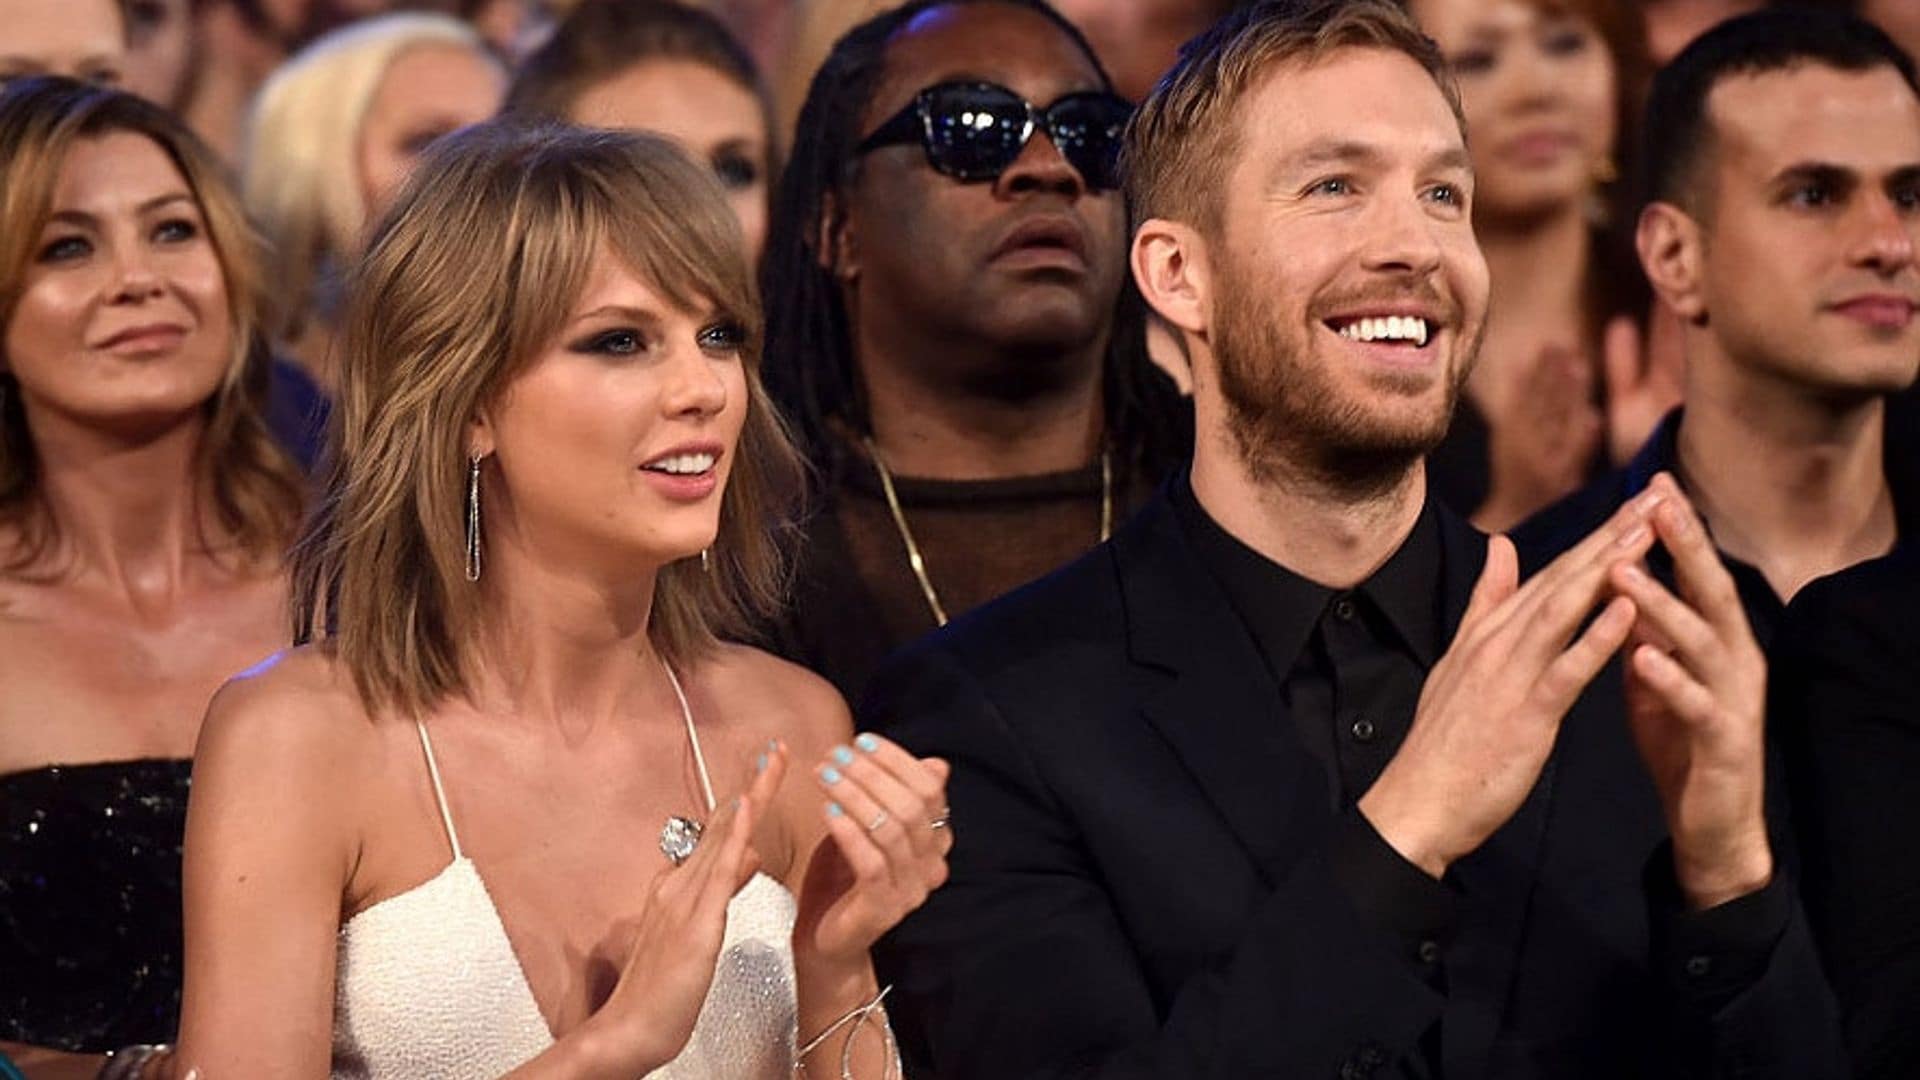 Calvin Harris reveals if there will ever be a collaboration with girlfriend Taylor Swift